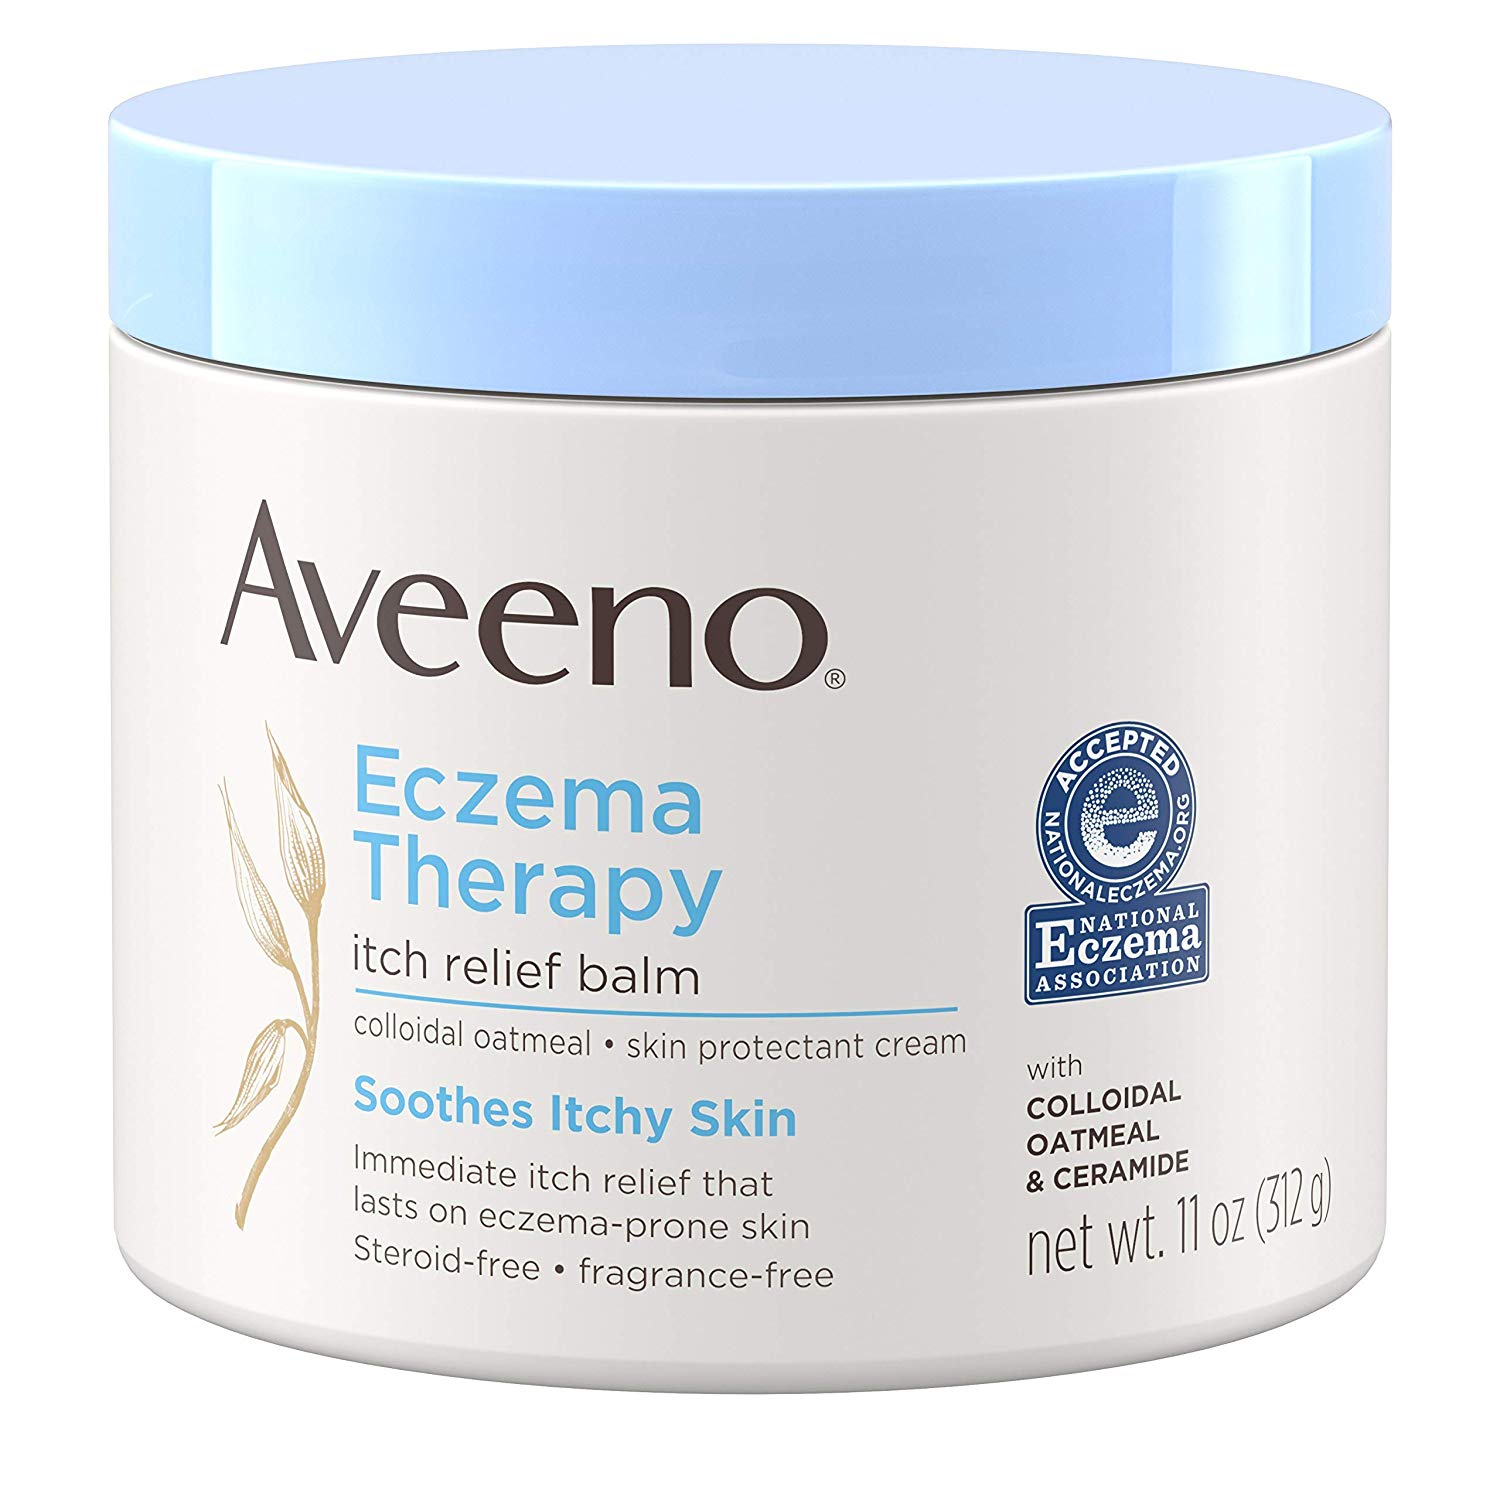 These Are The Best Creams For Soothing Eczema, According ...